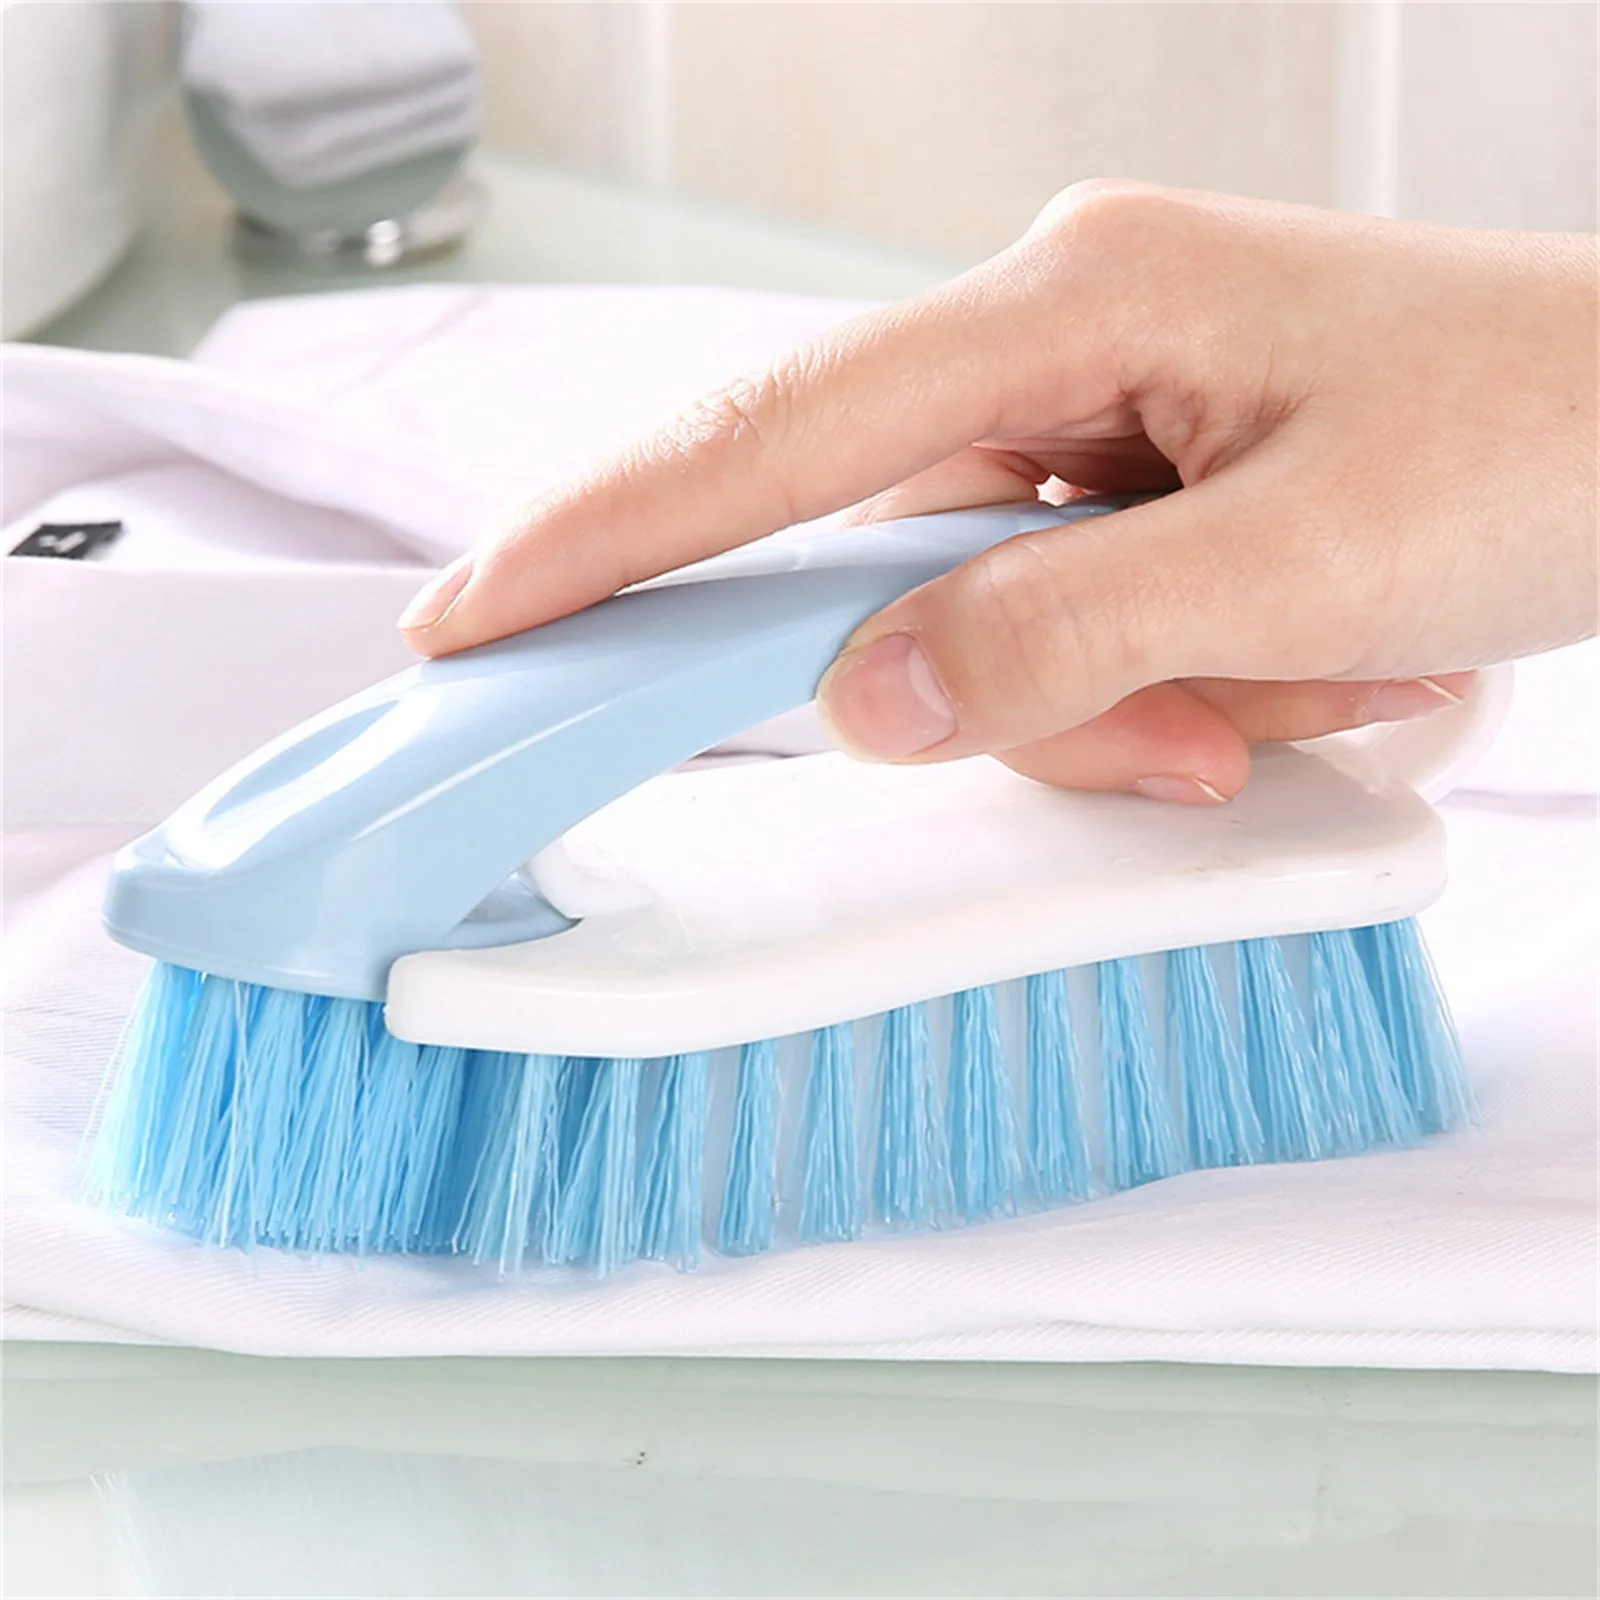 2 In 1 Handheld Clothes Cleaning Brush Narrow Cleaner Stains Scrub